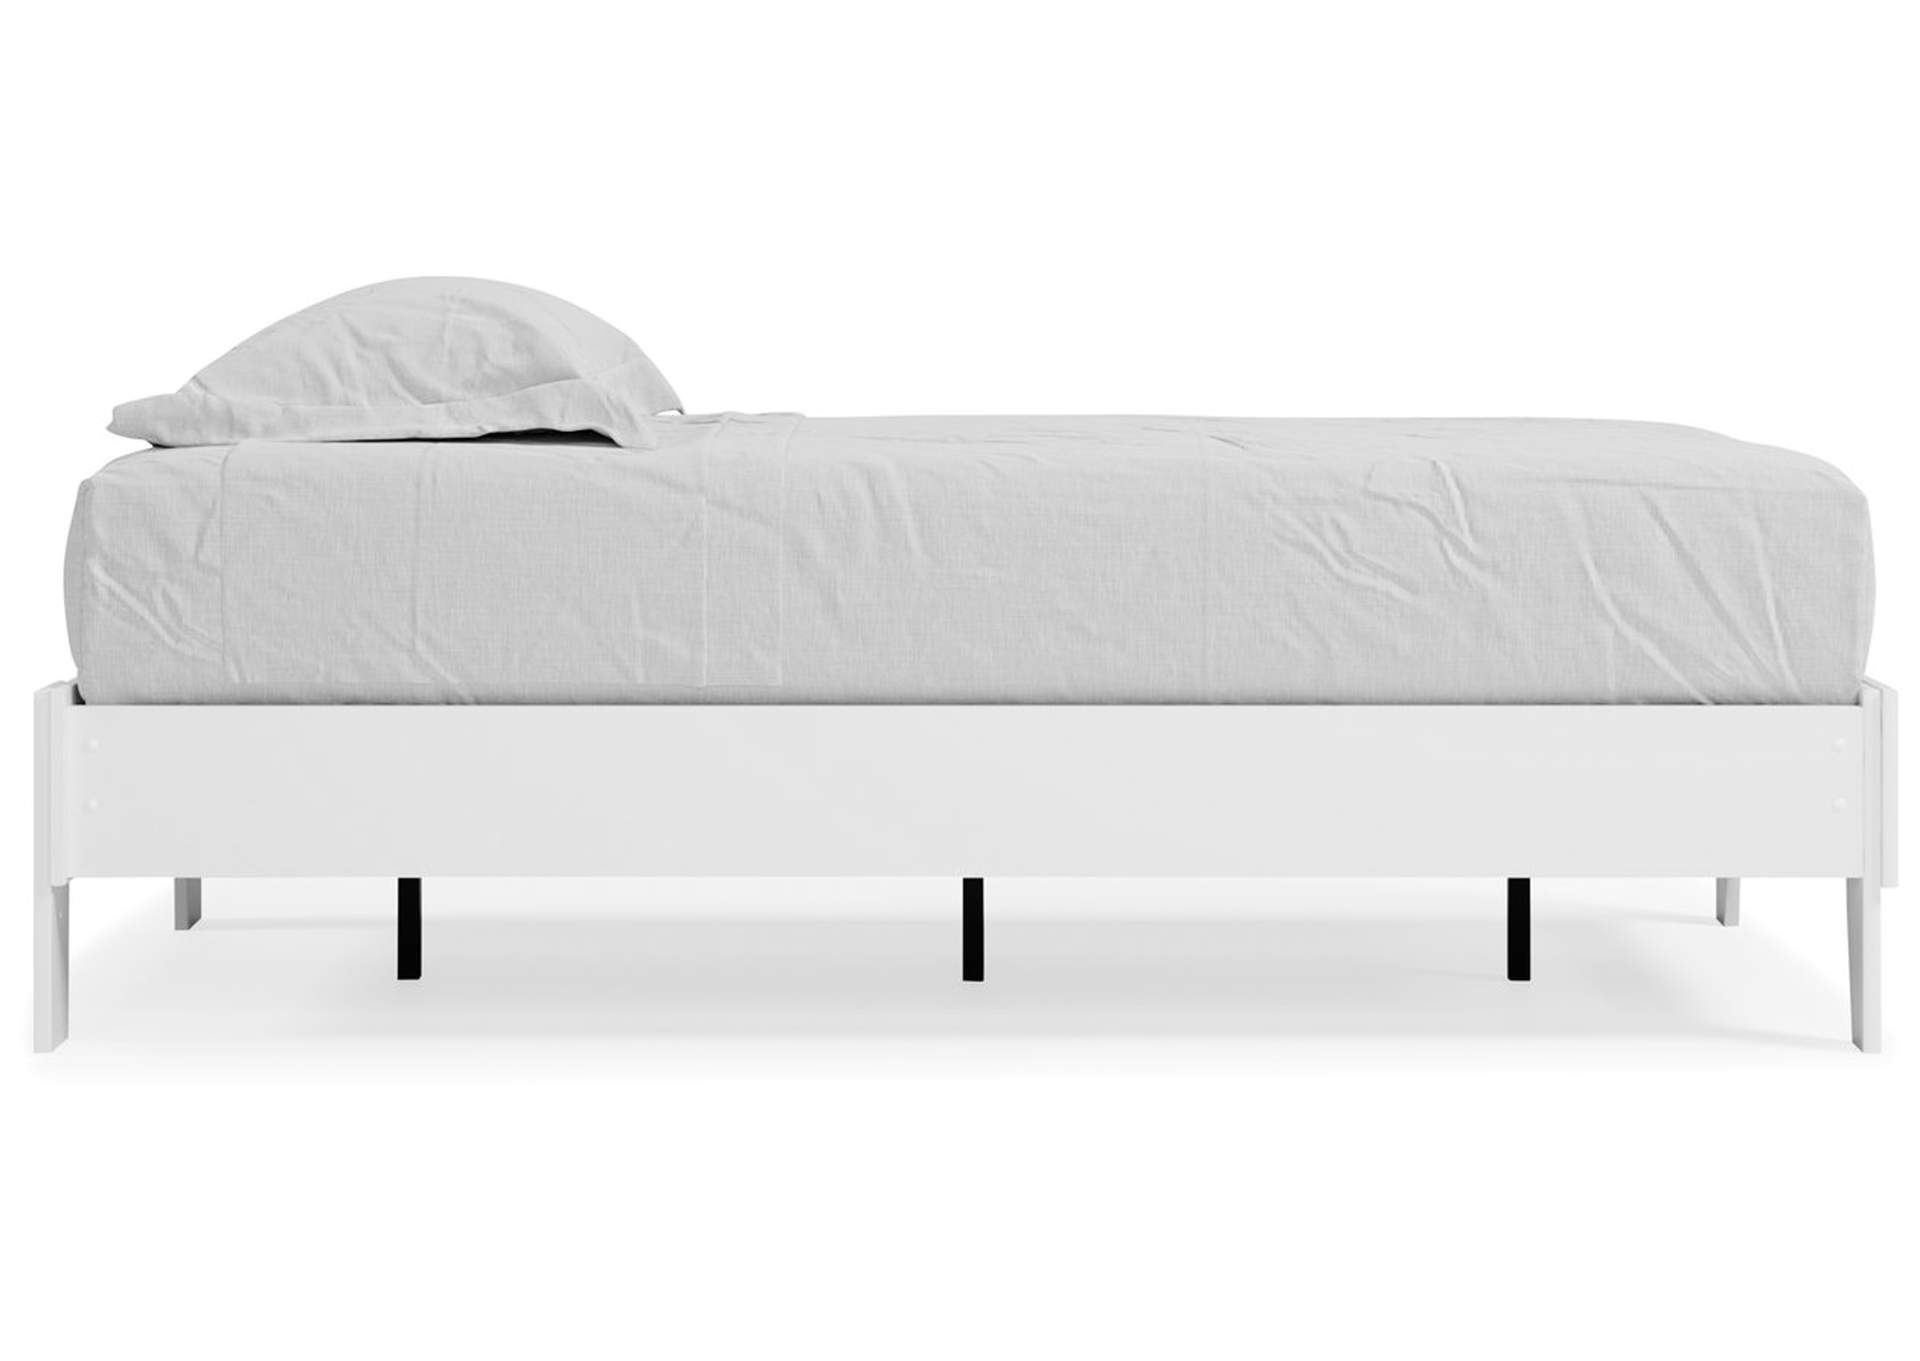 Piperton Twin Platform Bed,Signature Design By Ashley